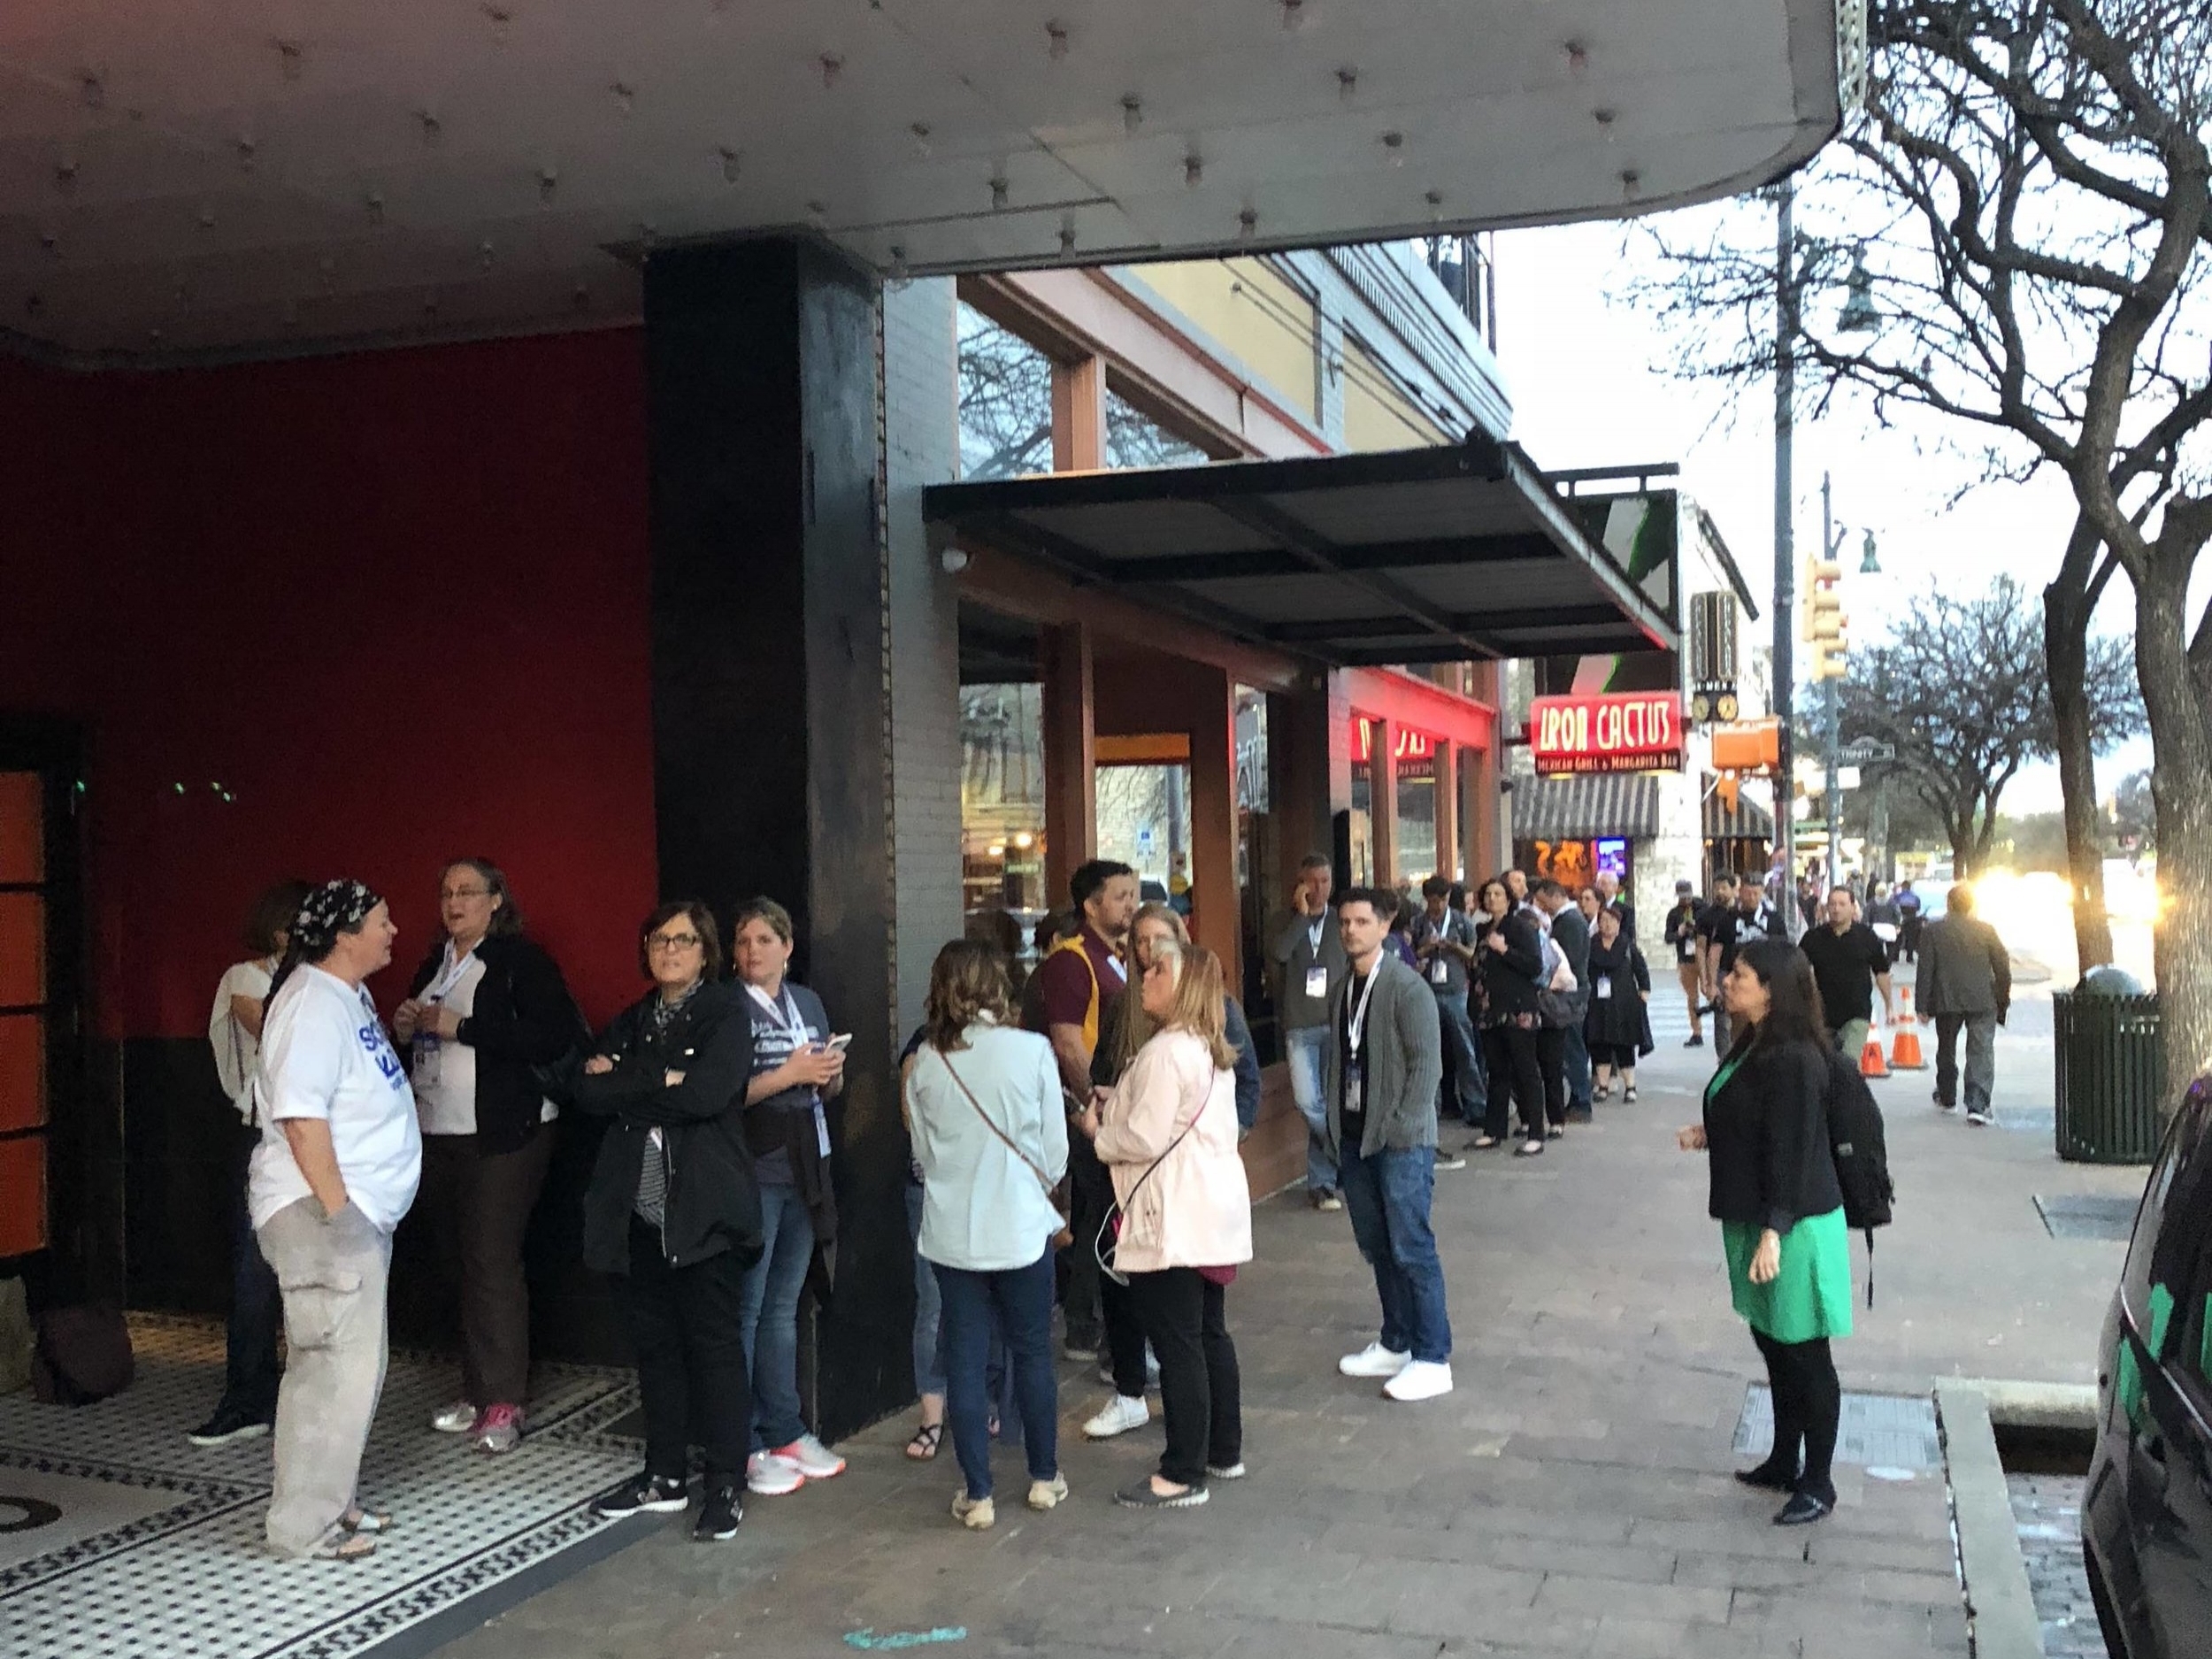 30 minutes before the screening, a line of people forms outside the theater. 